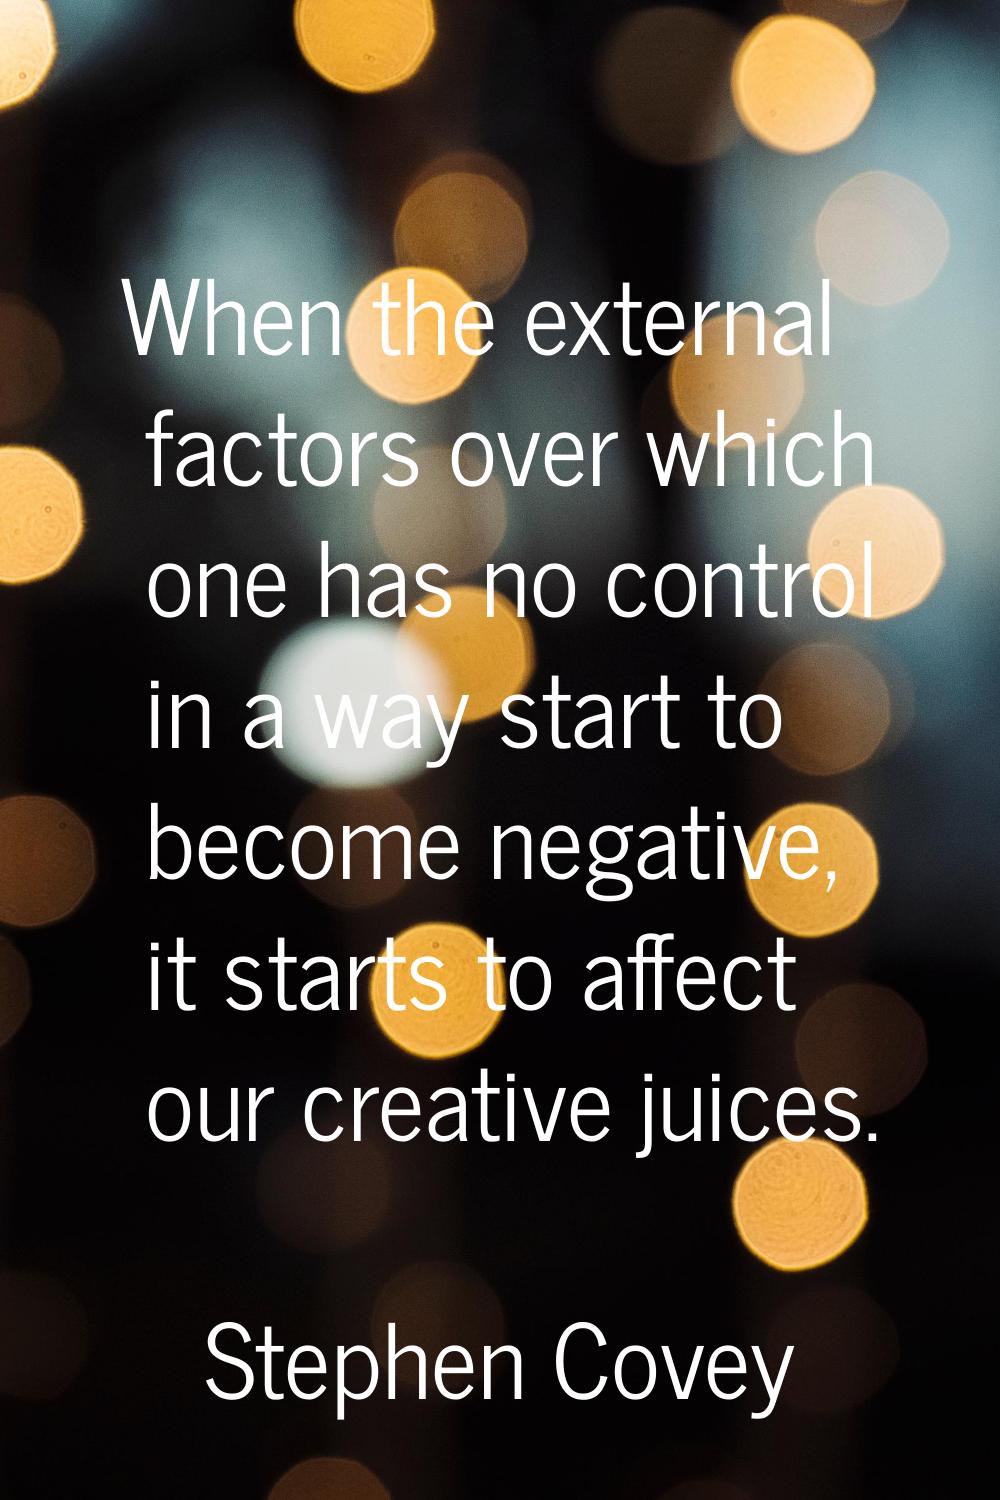 When the external factors over which one has no control in a way start to become negative, it start